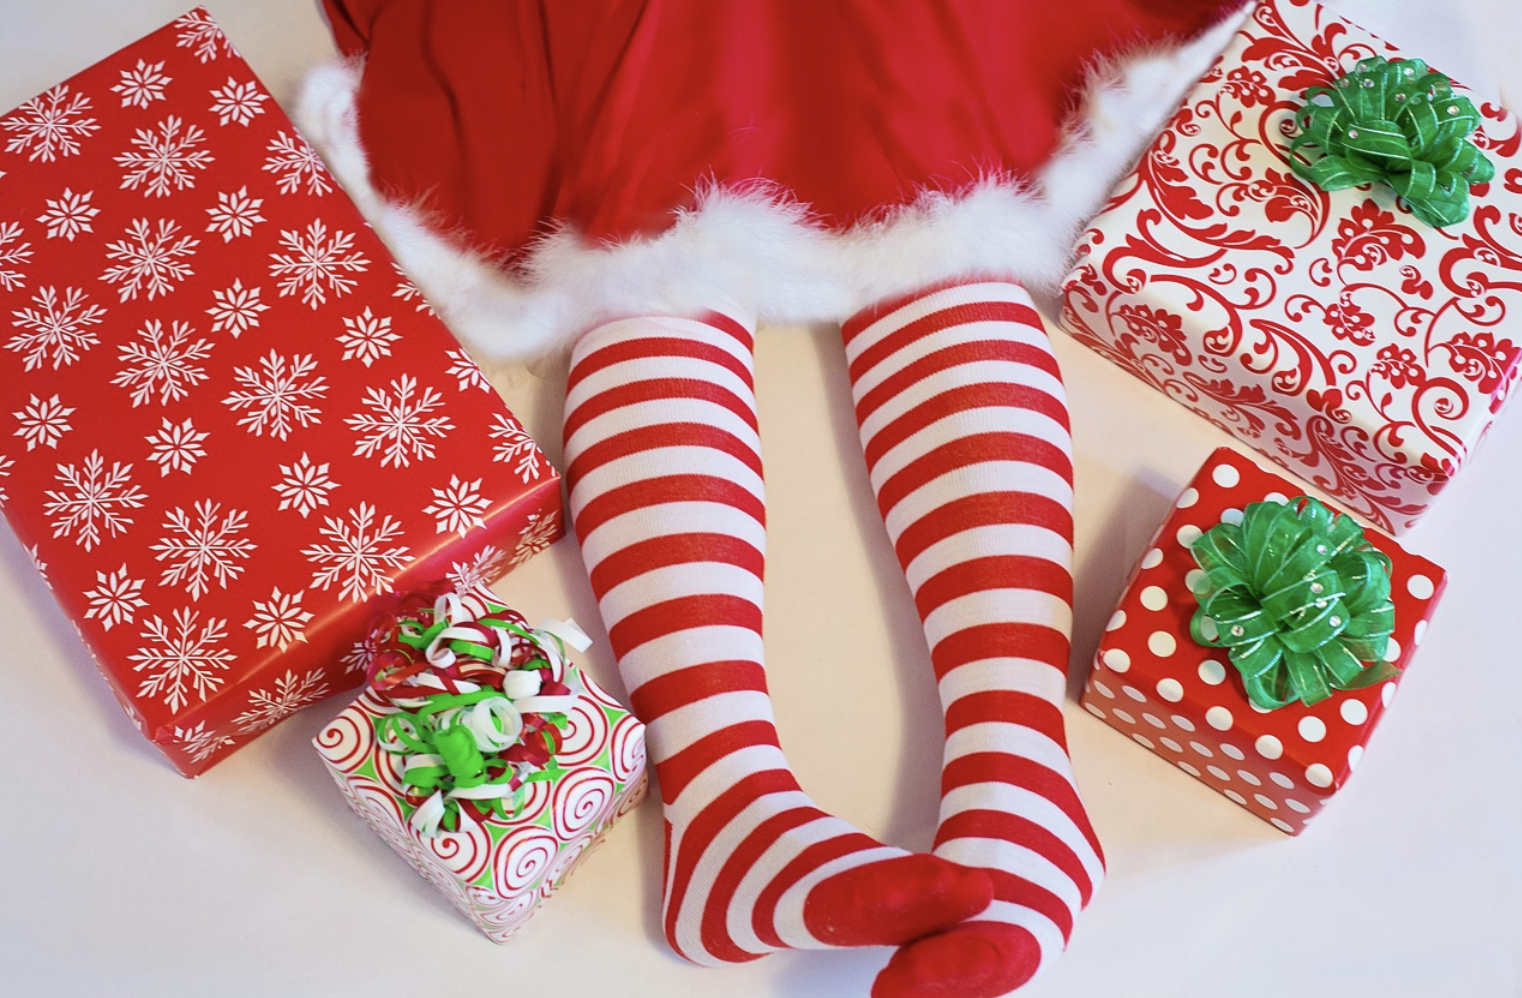 a person wearing red and white striped socks and a skirt with presents